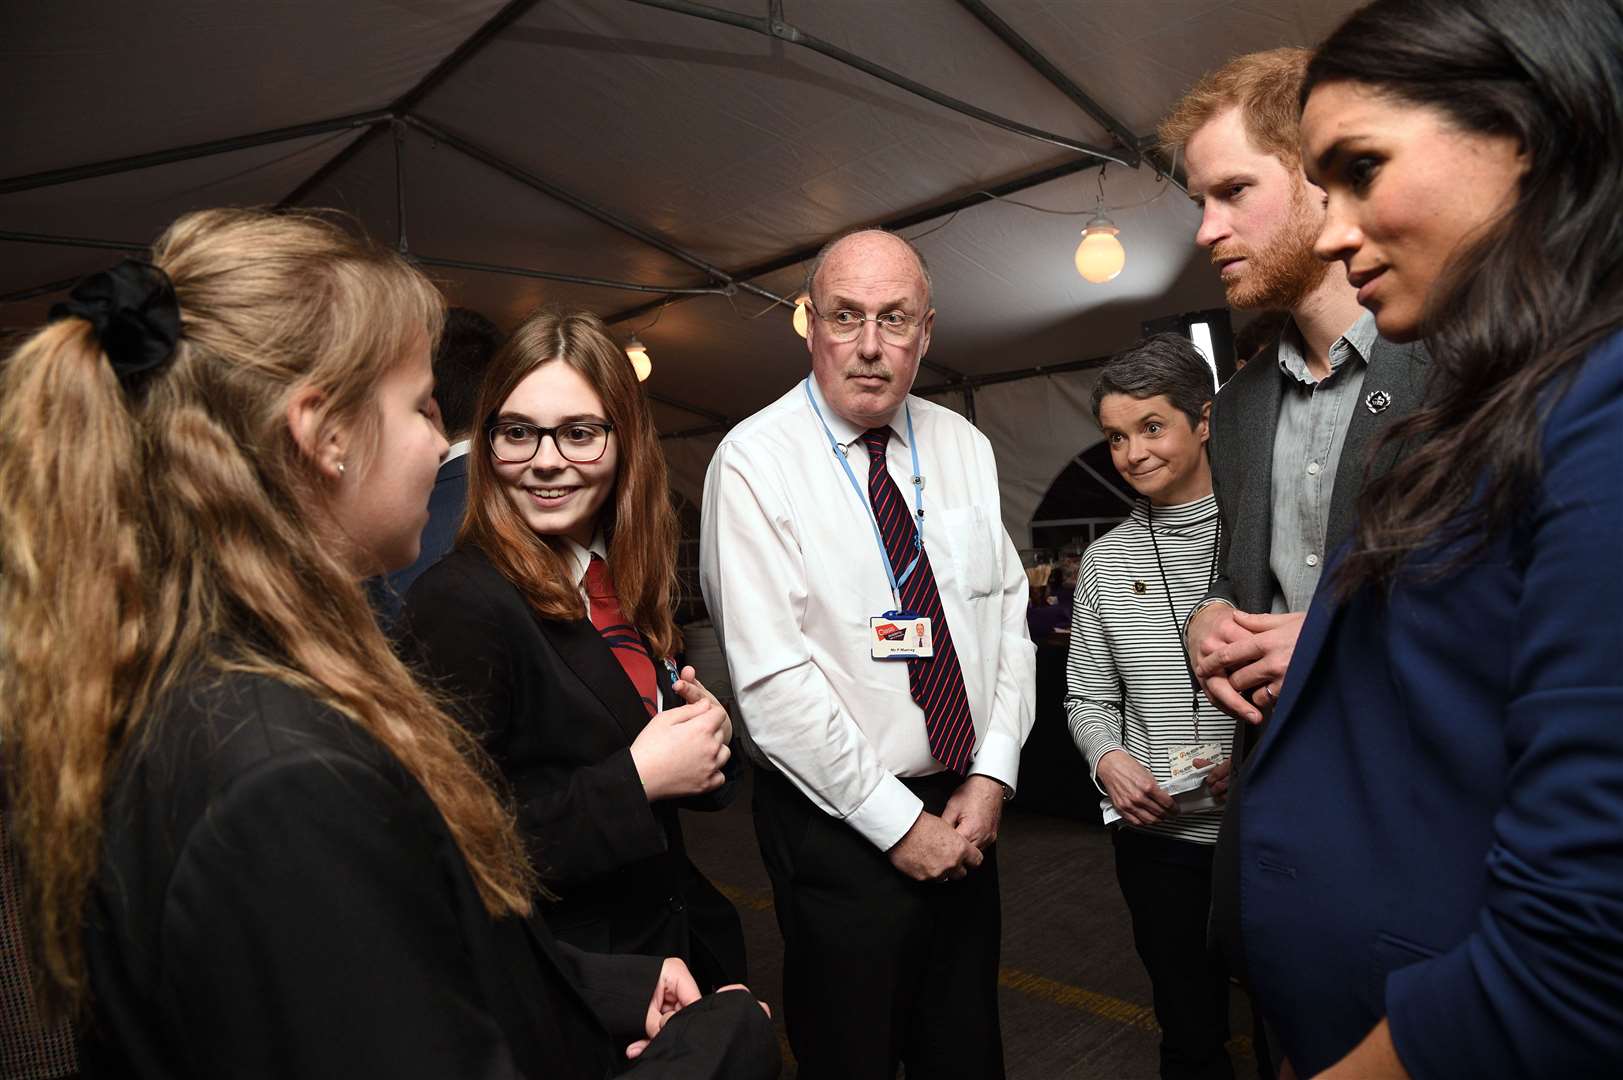 Oasis Isle of Sheppey Academy pupils Sinead Hubbard, 14, and Lucy Brightman-Stokes,12, meet the Duke and Duchess of Sussex Prince Harry and Meghan Markle backstage at Wembley Arena watched by teacher Paul Murray after the WE Day UK concert. Picture: Justin Goff/WE Day UK